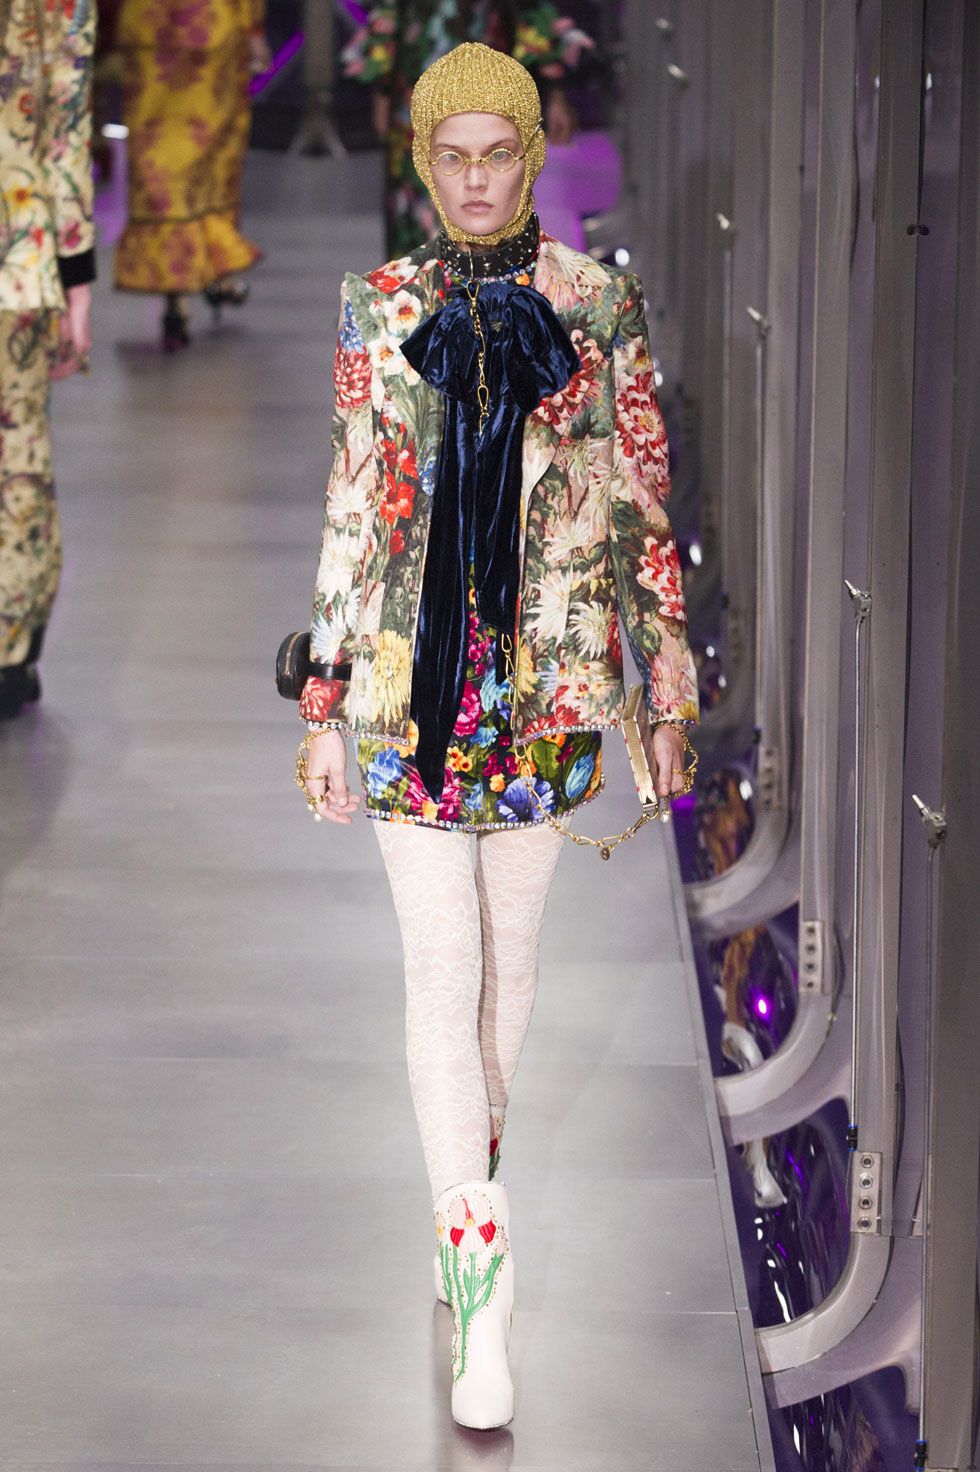 119 Looks From Gucci Fall 2017 MFW Show - Gucci Runway at Milan